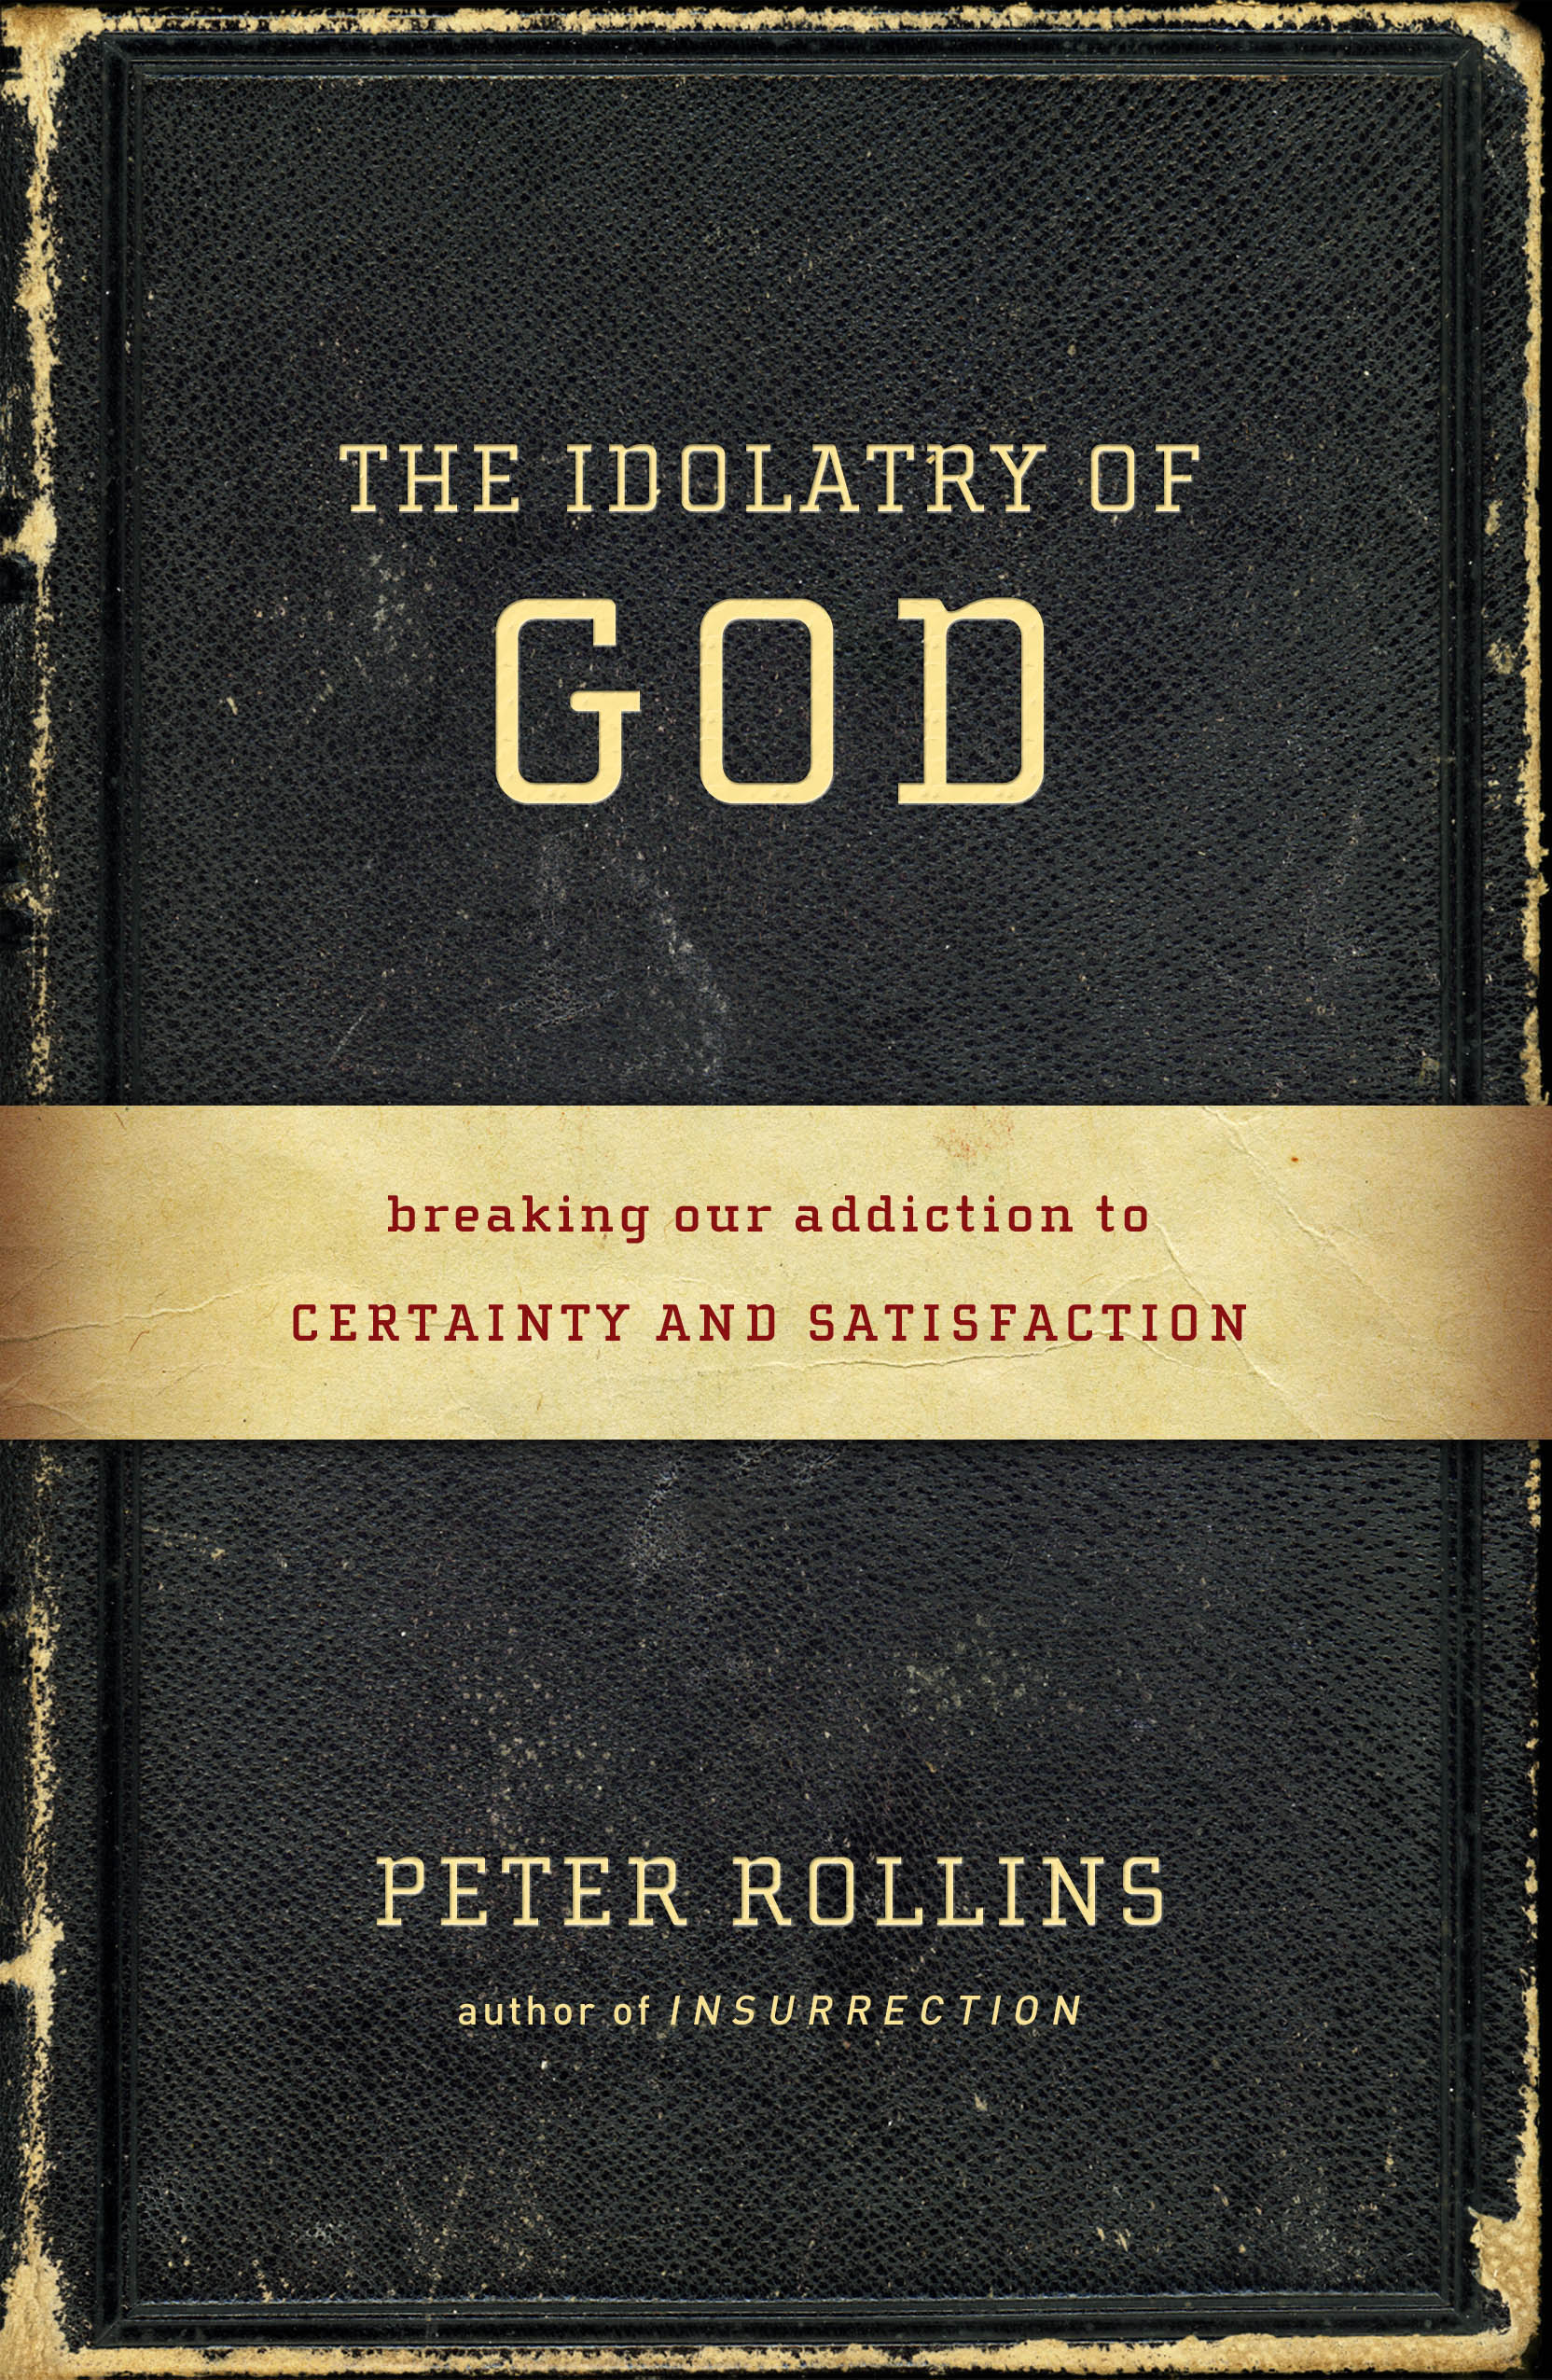 The Idolatry of God: Breaking Our Addiction to Certainty and Satisfaction